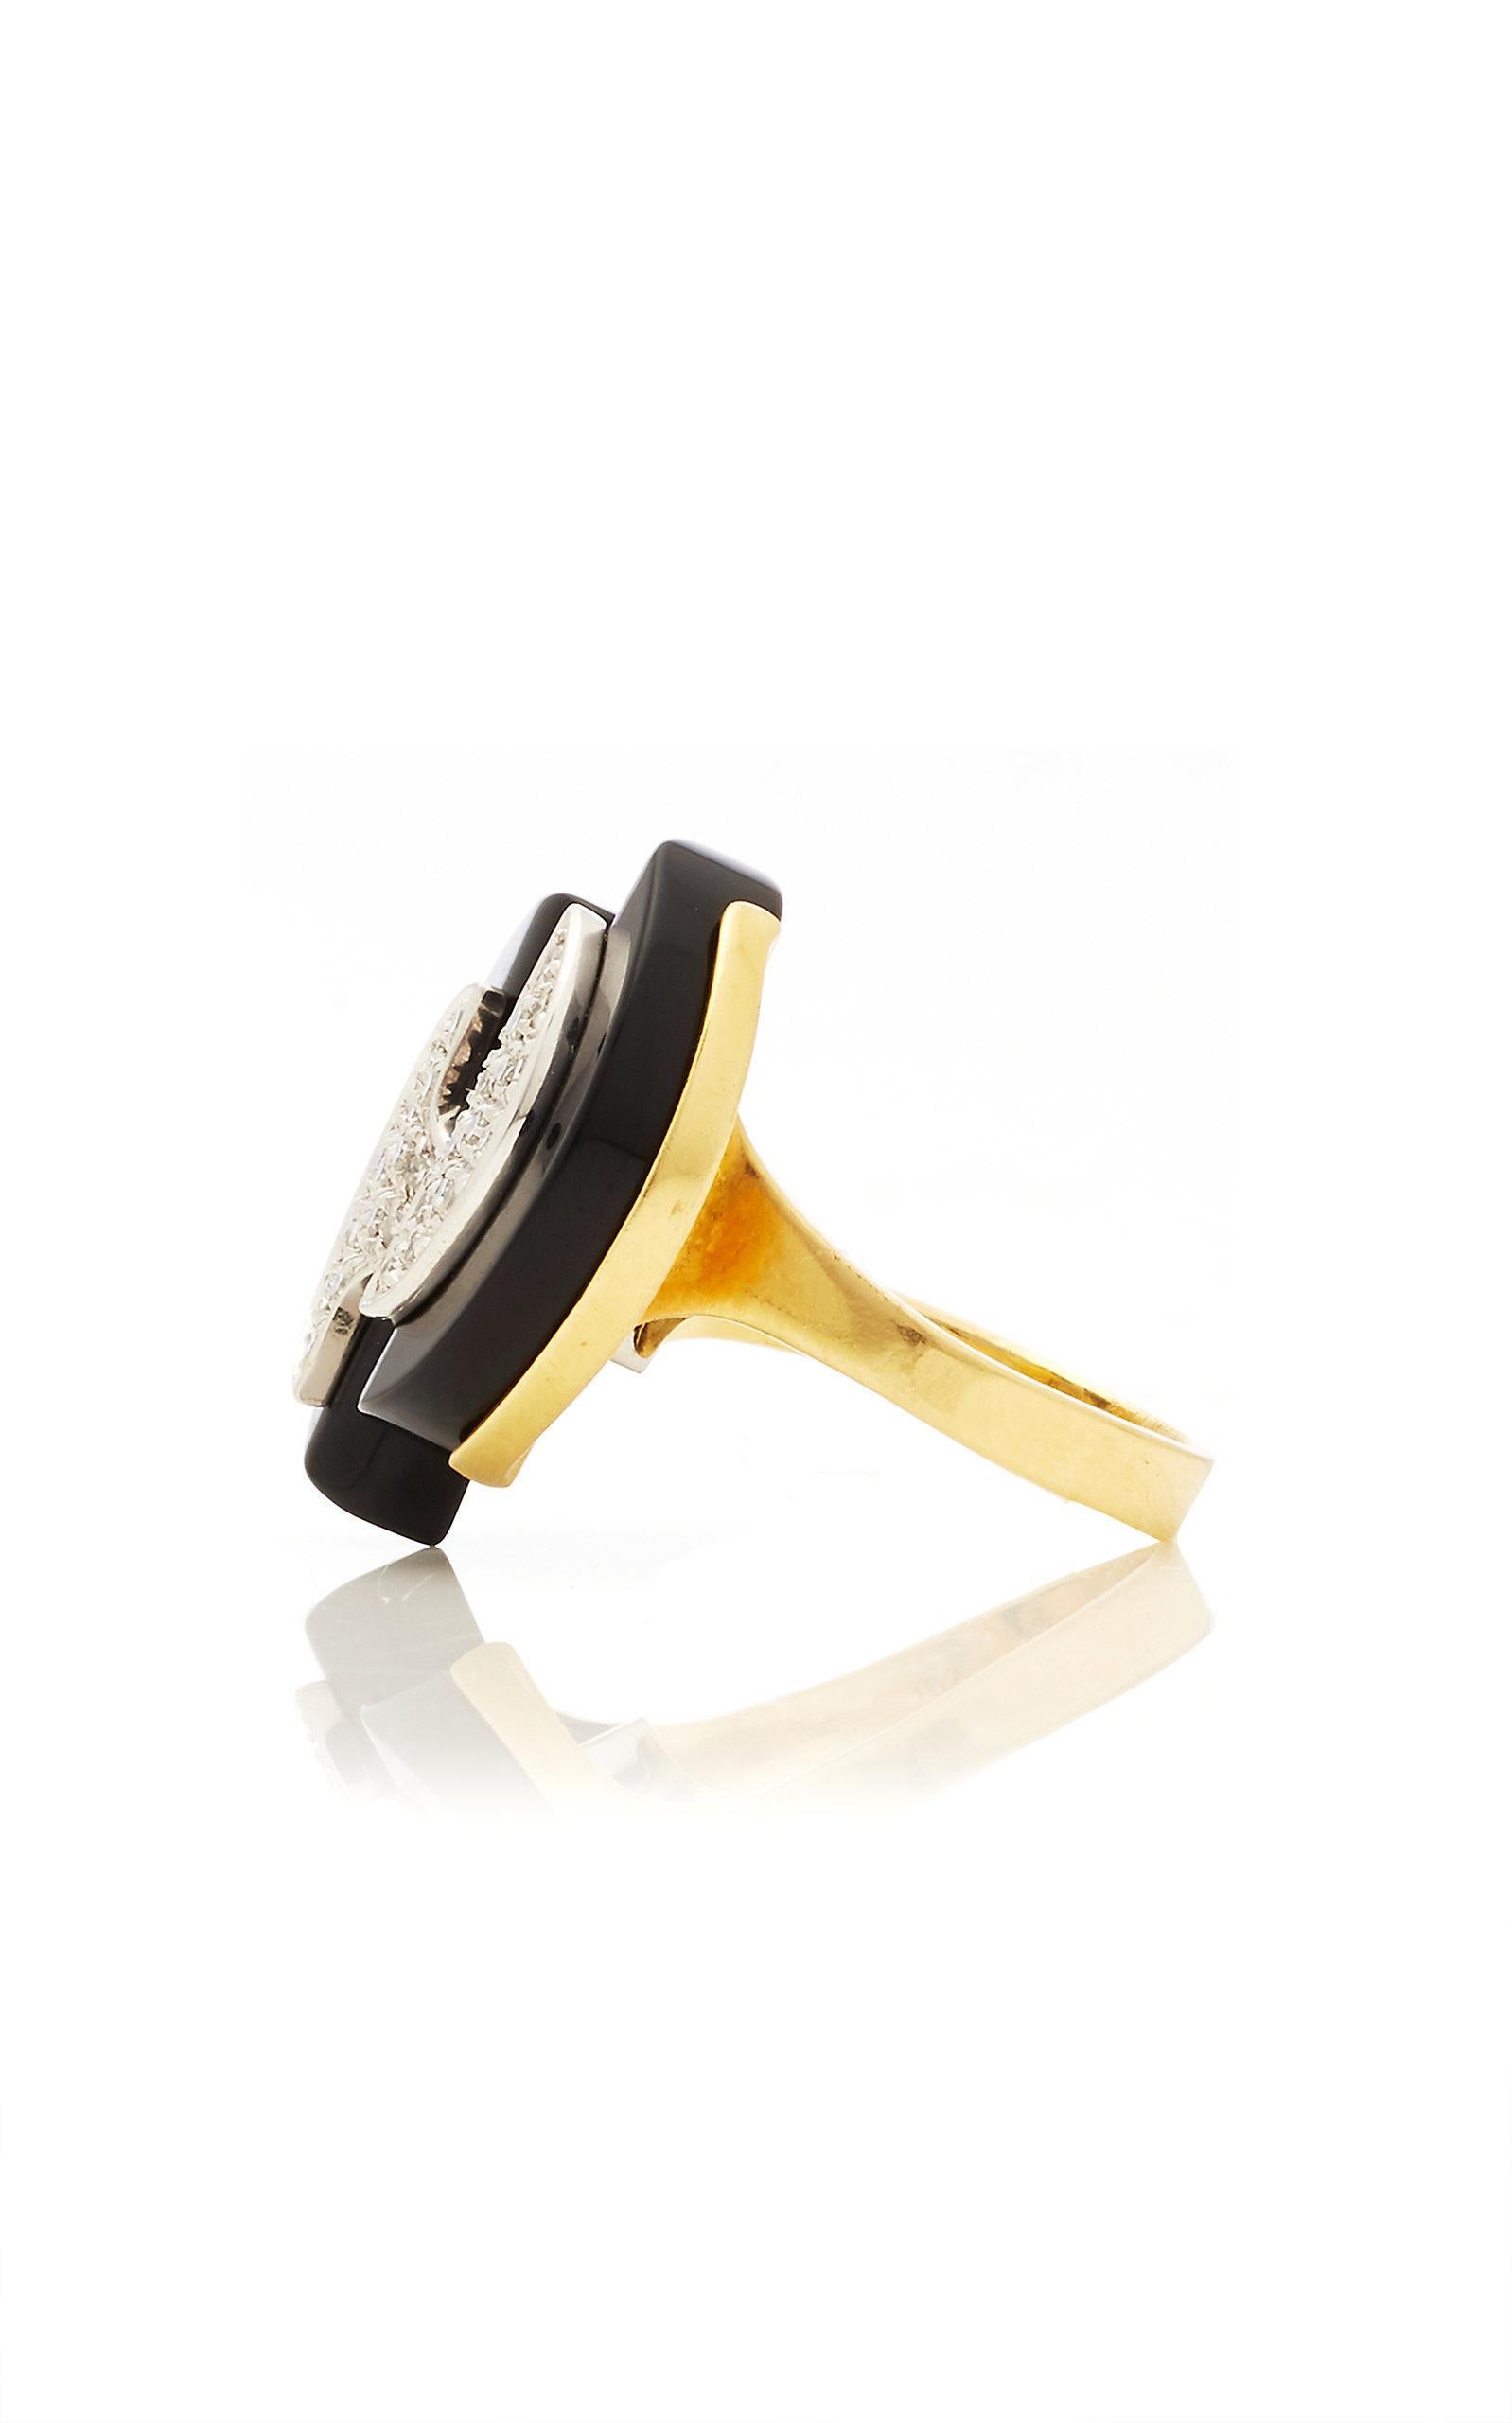 Geometrical design ring in yellow gold with onyx and diamonds. Circa 1970s.